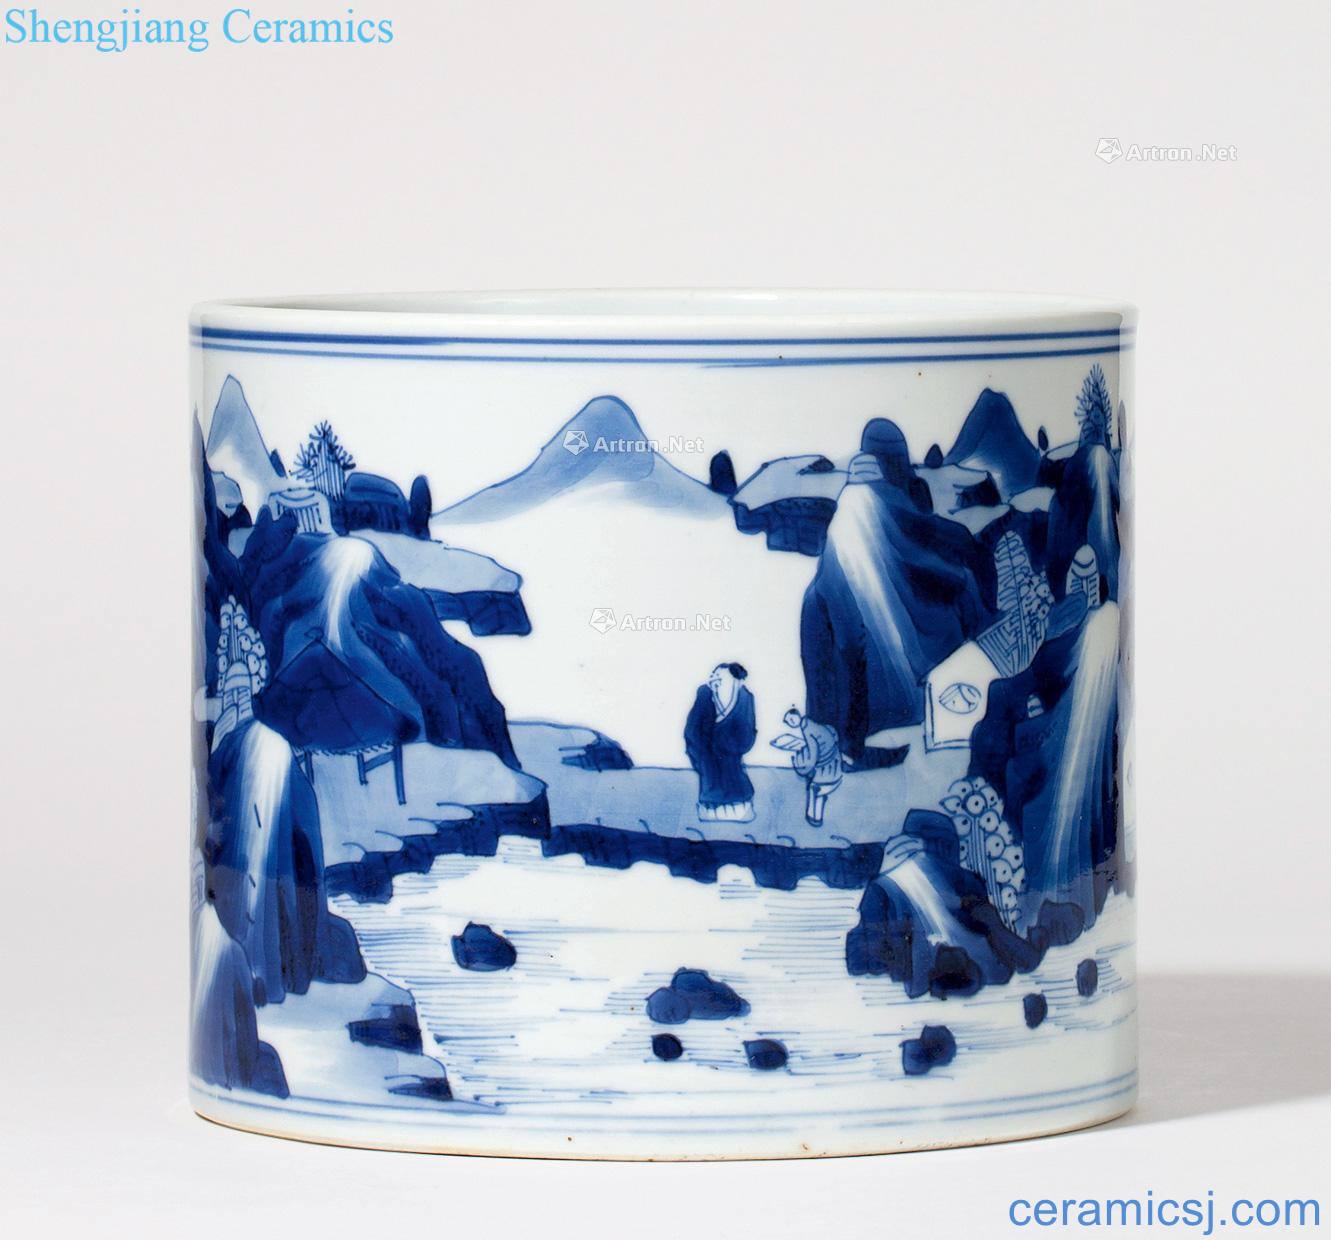 The qing emperor kangxi porcelain with jean friends brush pot